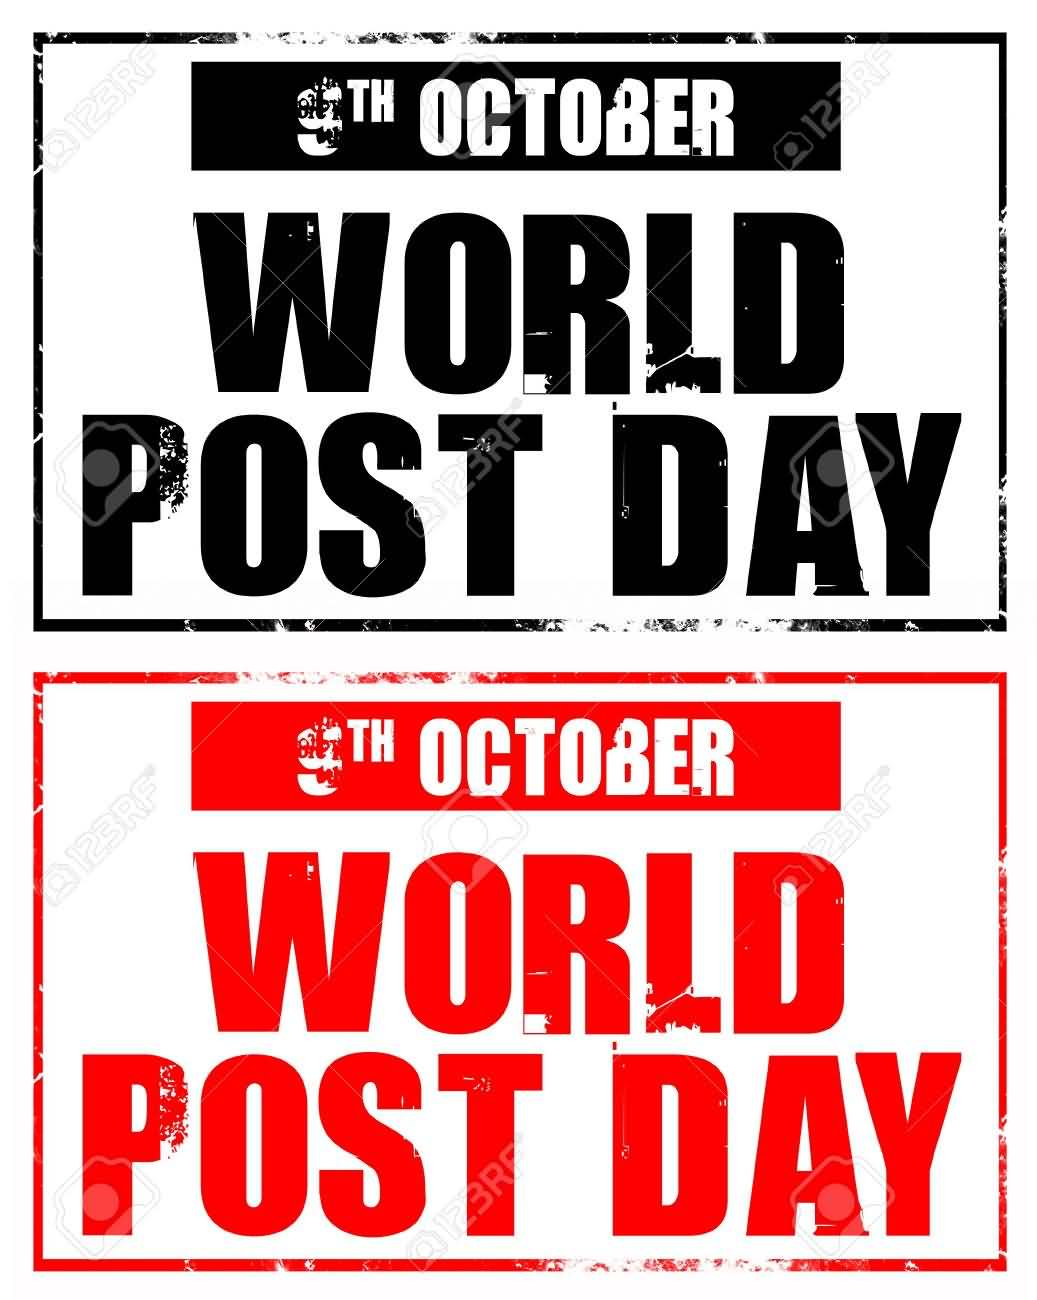 9th October World Post Day